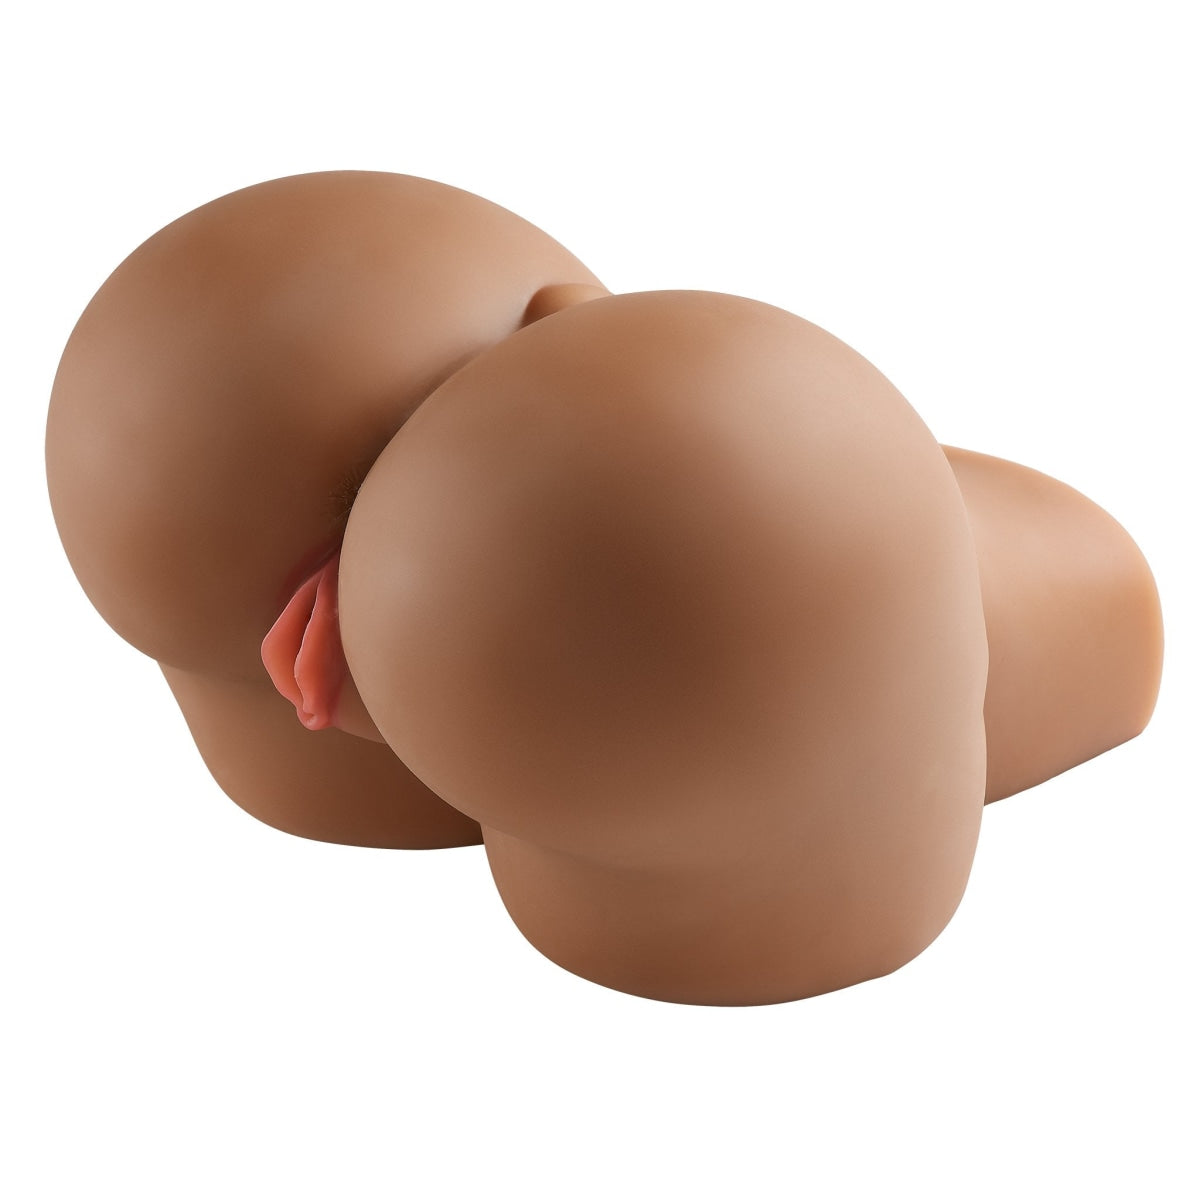 Cloud 9 Pleasure Pussy & Ass Lifesize Body Mold - Brown Intimates Adult Boutique